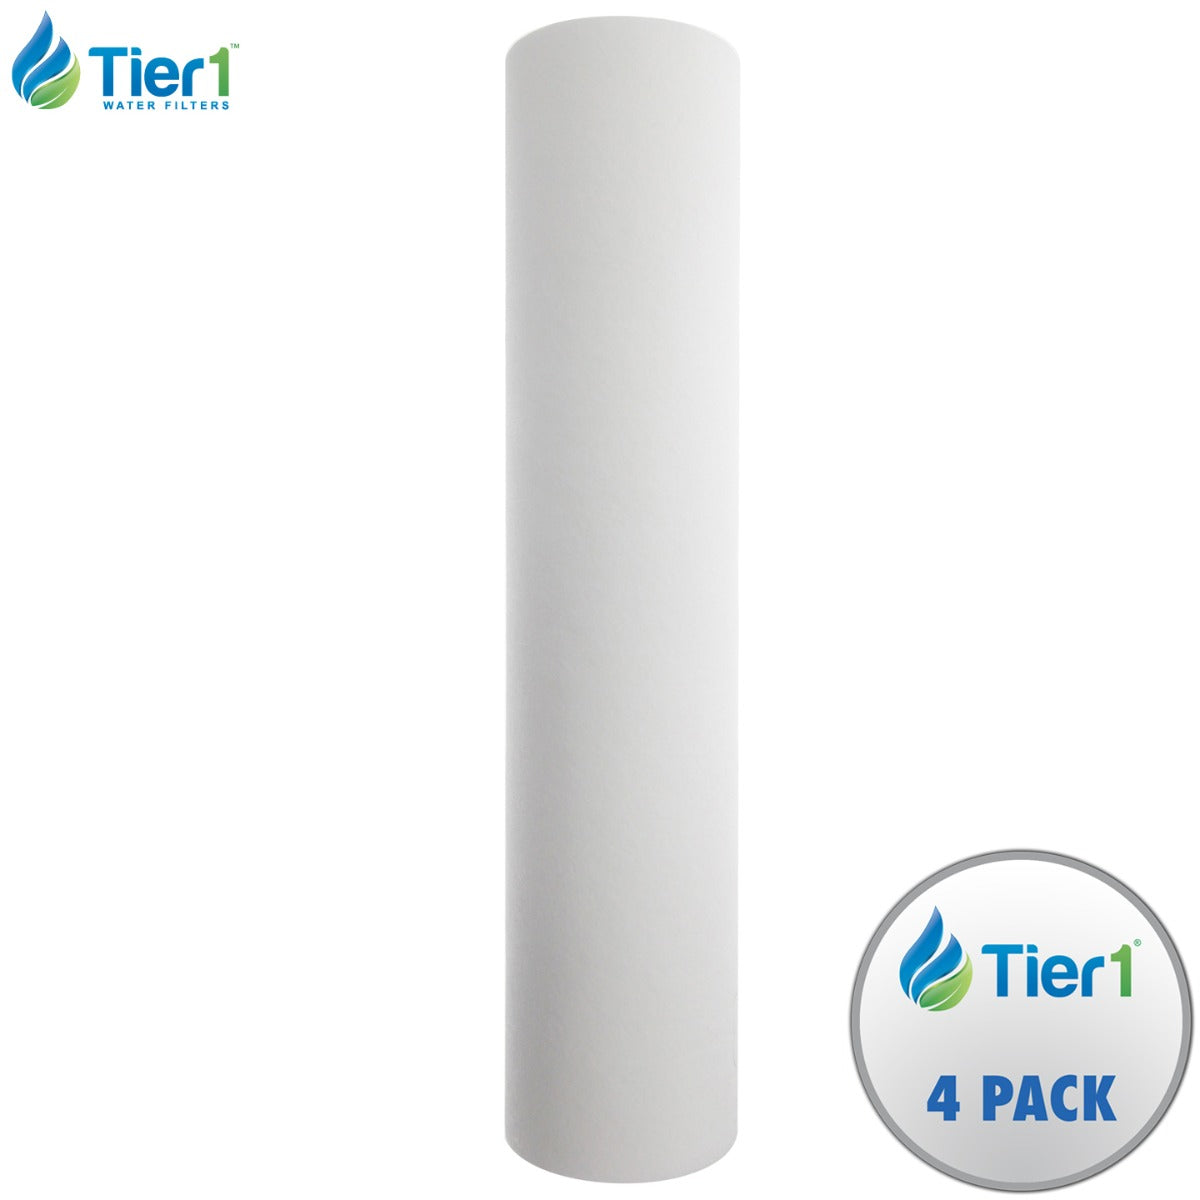 Tier1 20 inch x 4.5 inch Sediment Water Filter (10 Micron)